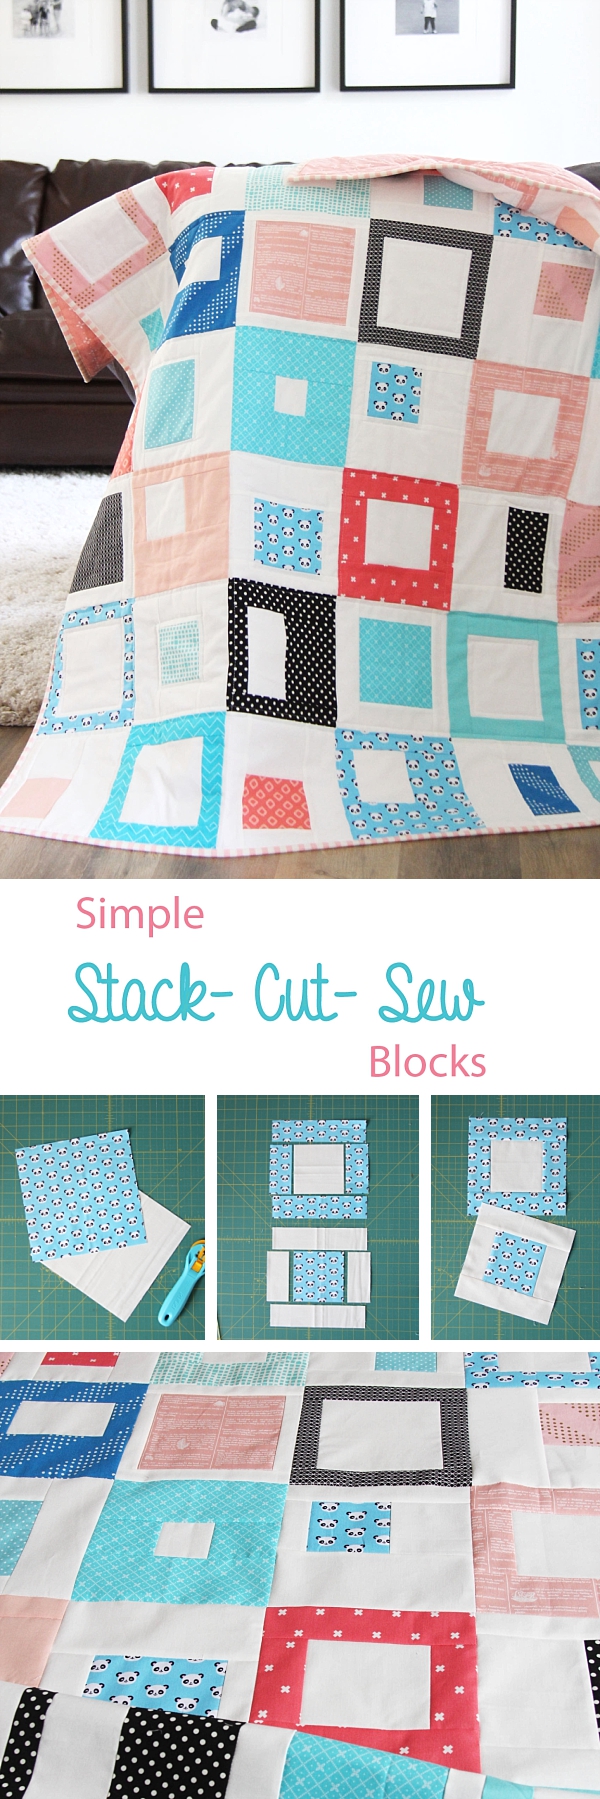 Stack, Cut, and Sew Block Square Sizes